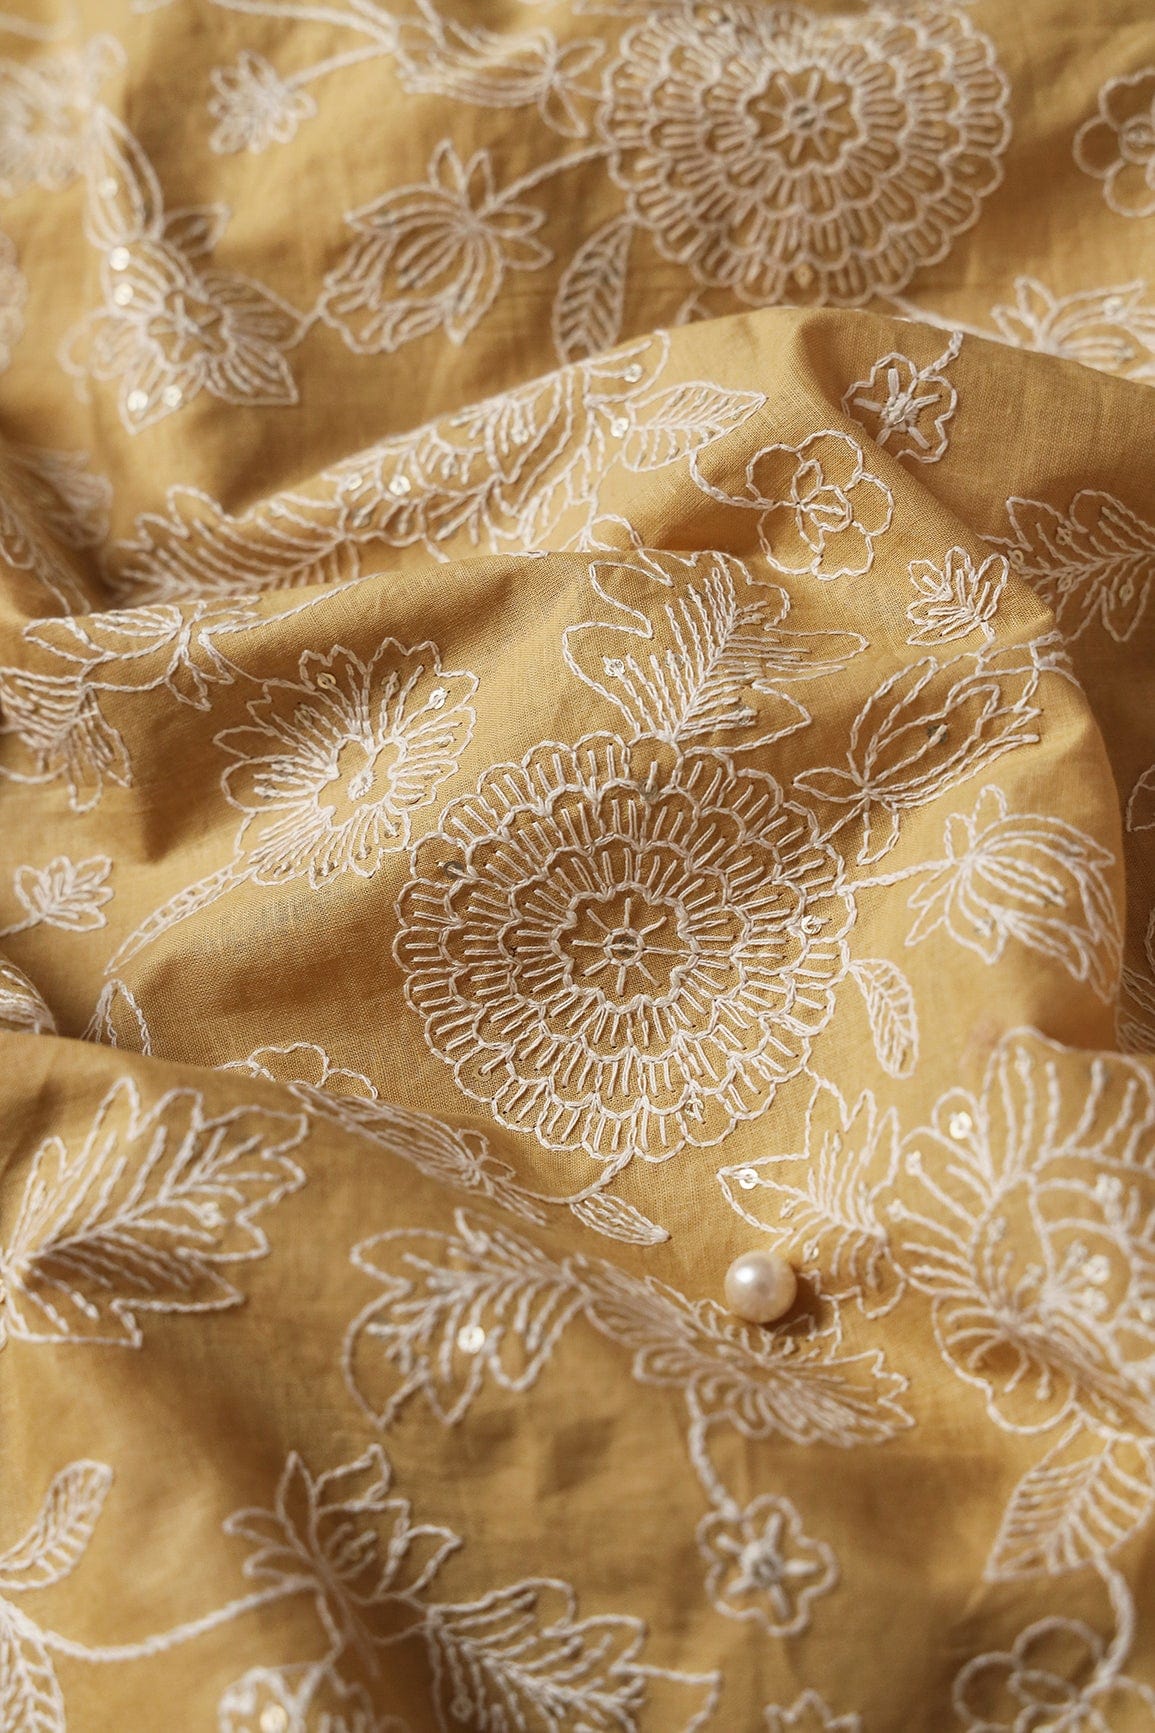 doeraa Prints 4.75 Meter Cut Piece Of White Thread With Gold Sequins Floral Embroidery On Beige Cotton Fabric